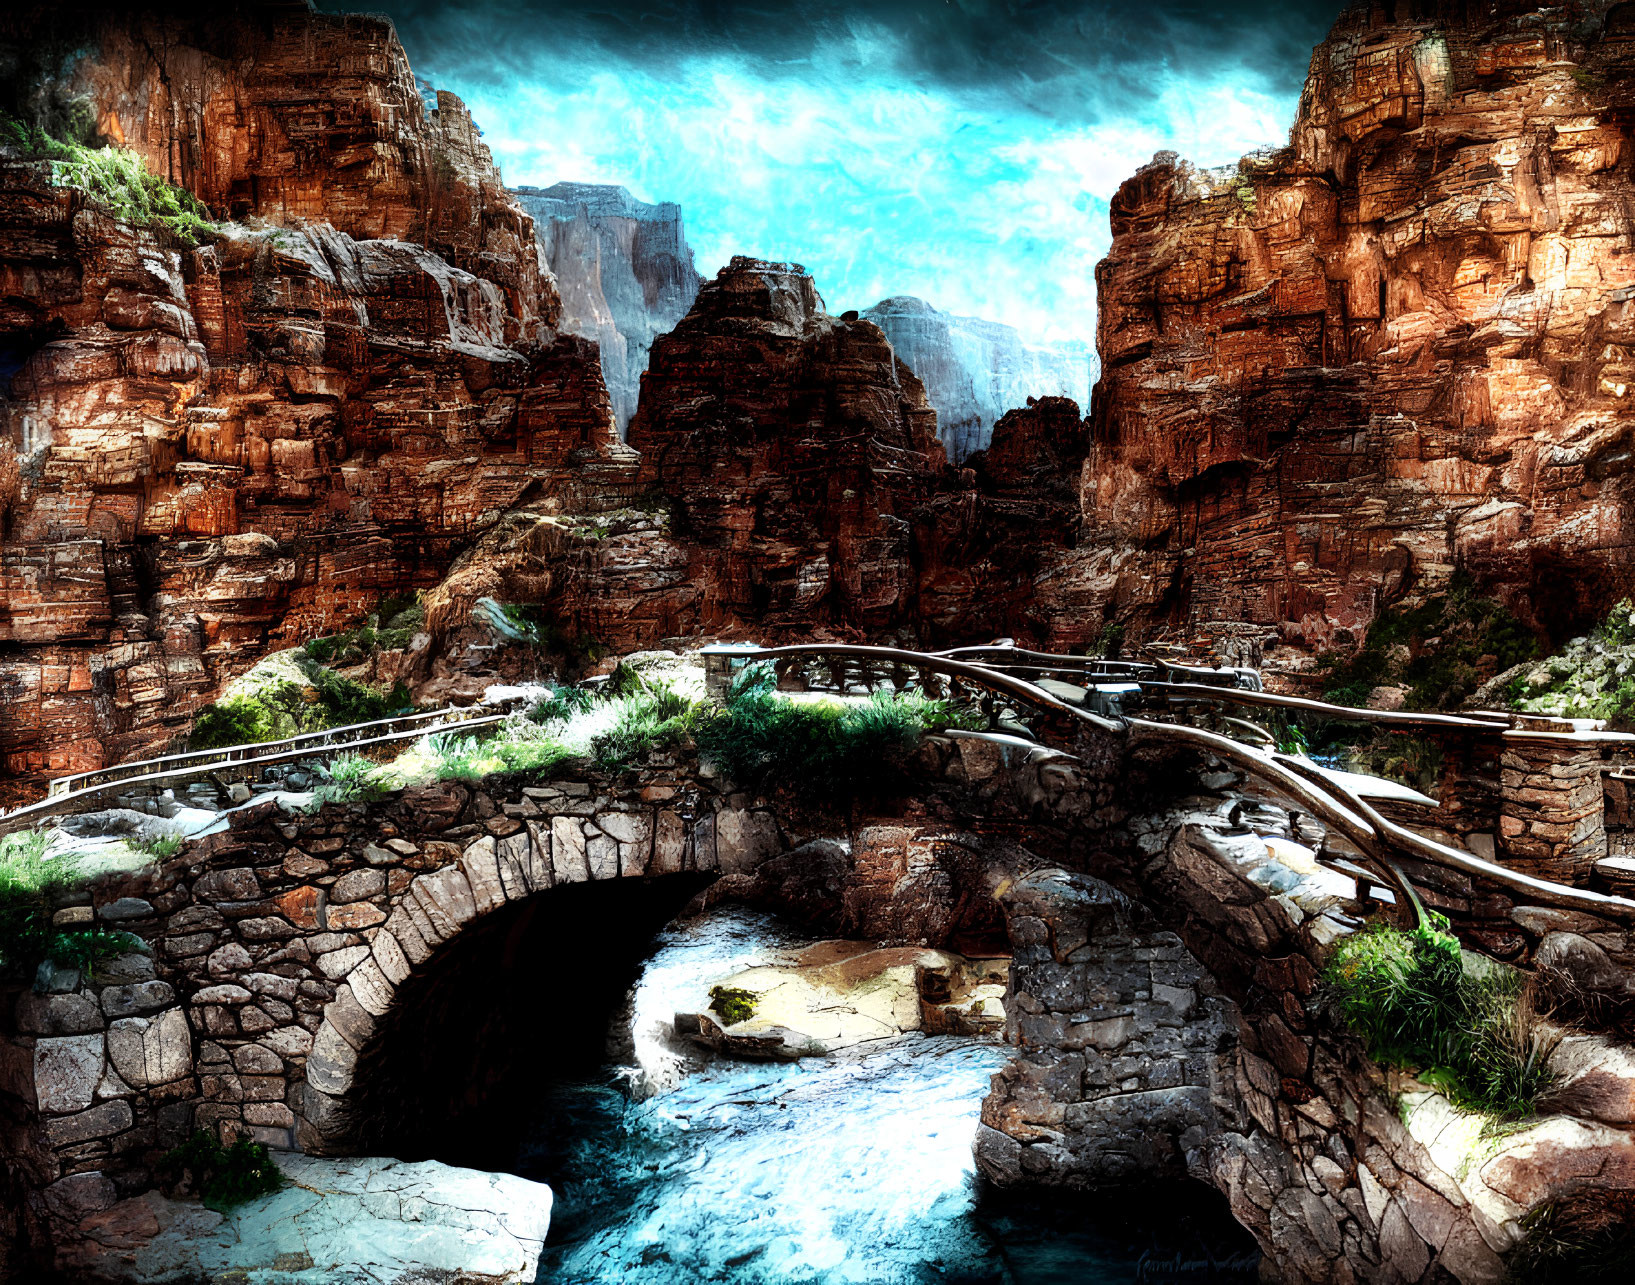 Fantasy landscape with stone bridge, river, cliffs, and cloudy sky